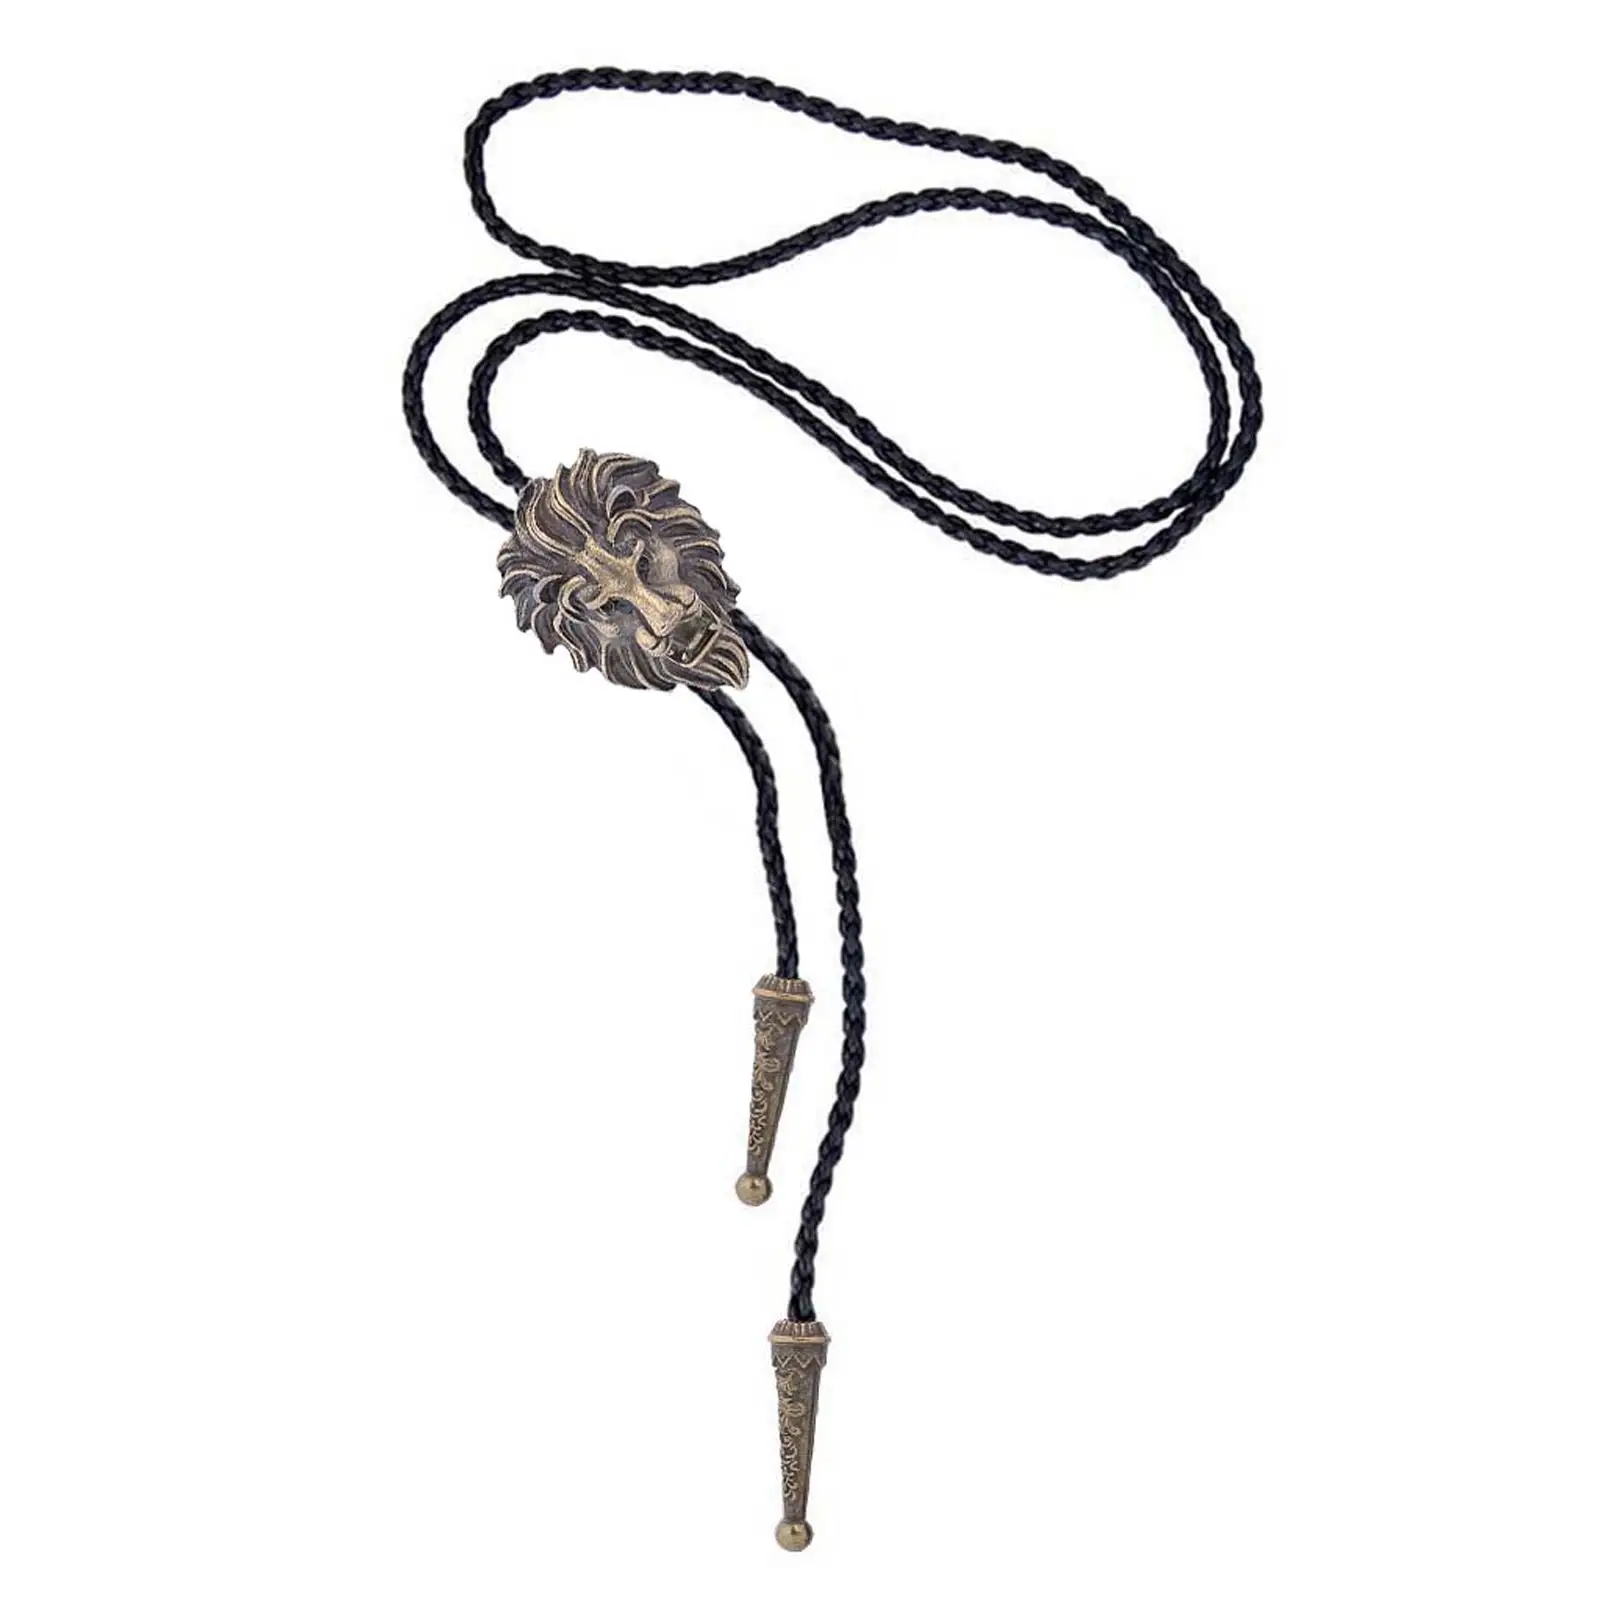 Lion Head Bolo Tie Necktie Leather Accessories Vintage Western Cowboy Rodeo Gift Alloy Necklace for Birthday Party Men and Women